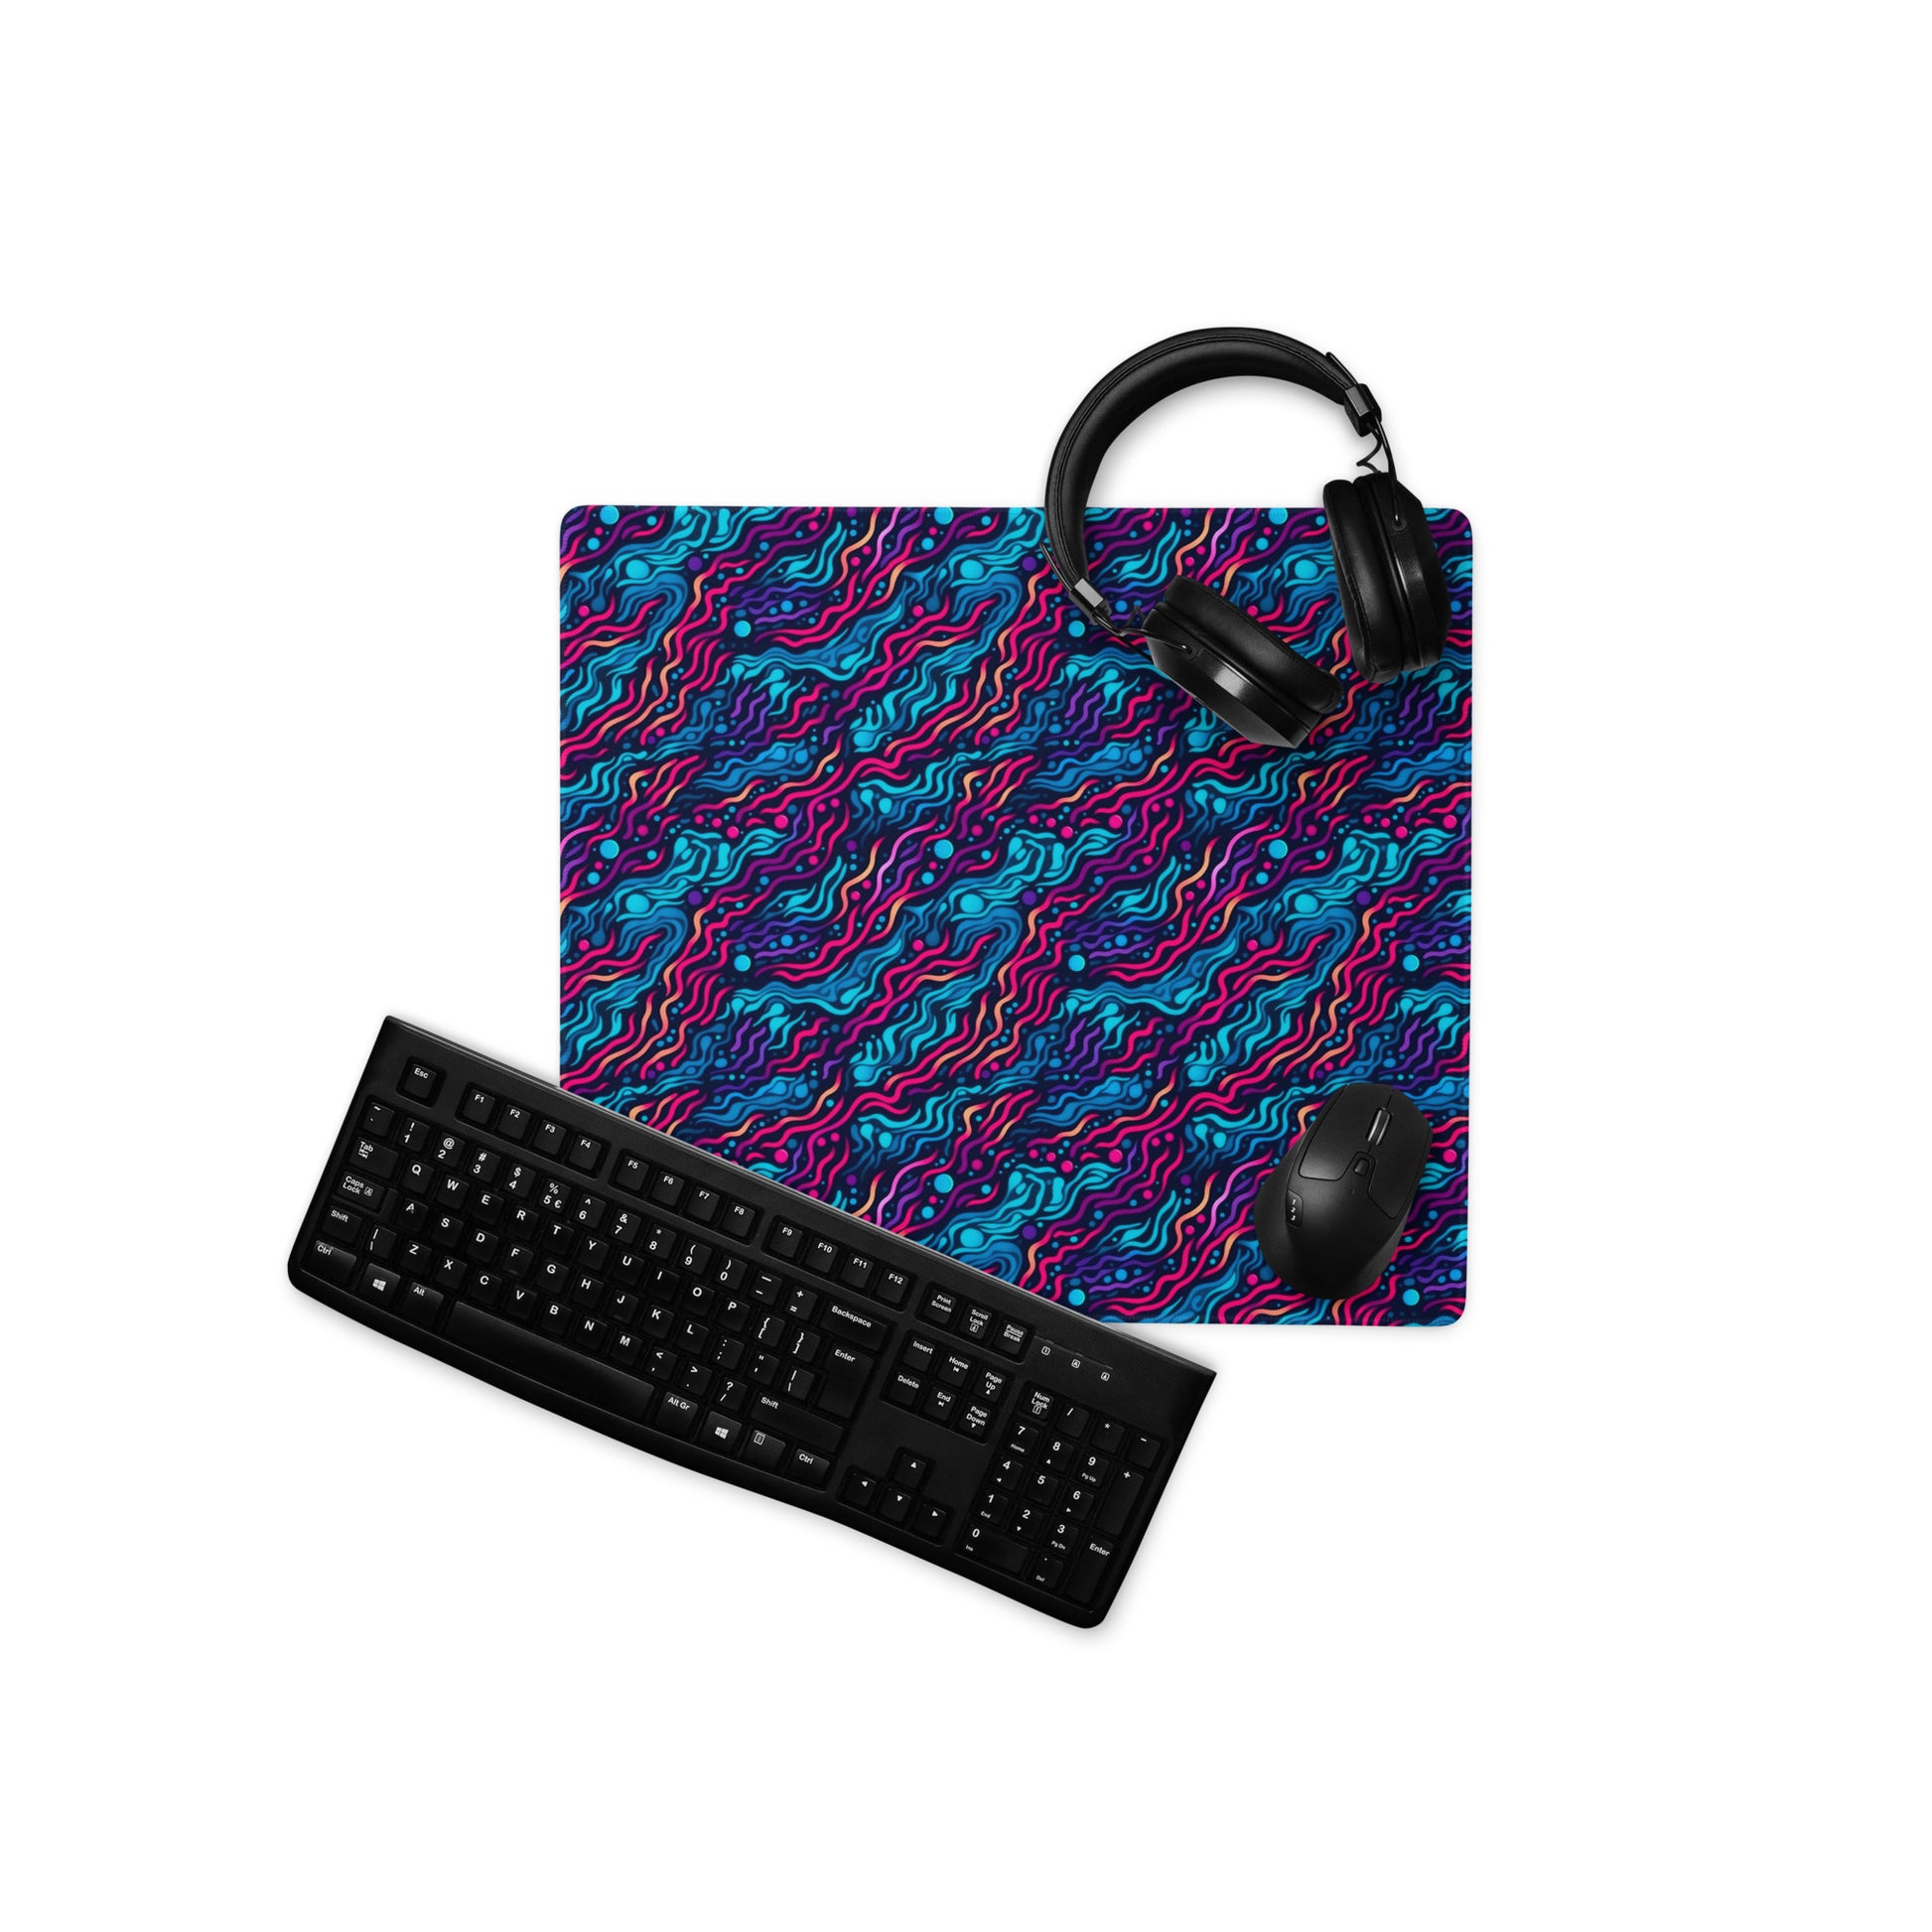 A 18" x 16" desk pad with wavy blue and pink pattern. With a keyboard, mouse, and headphones sitting on it.